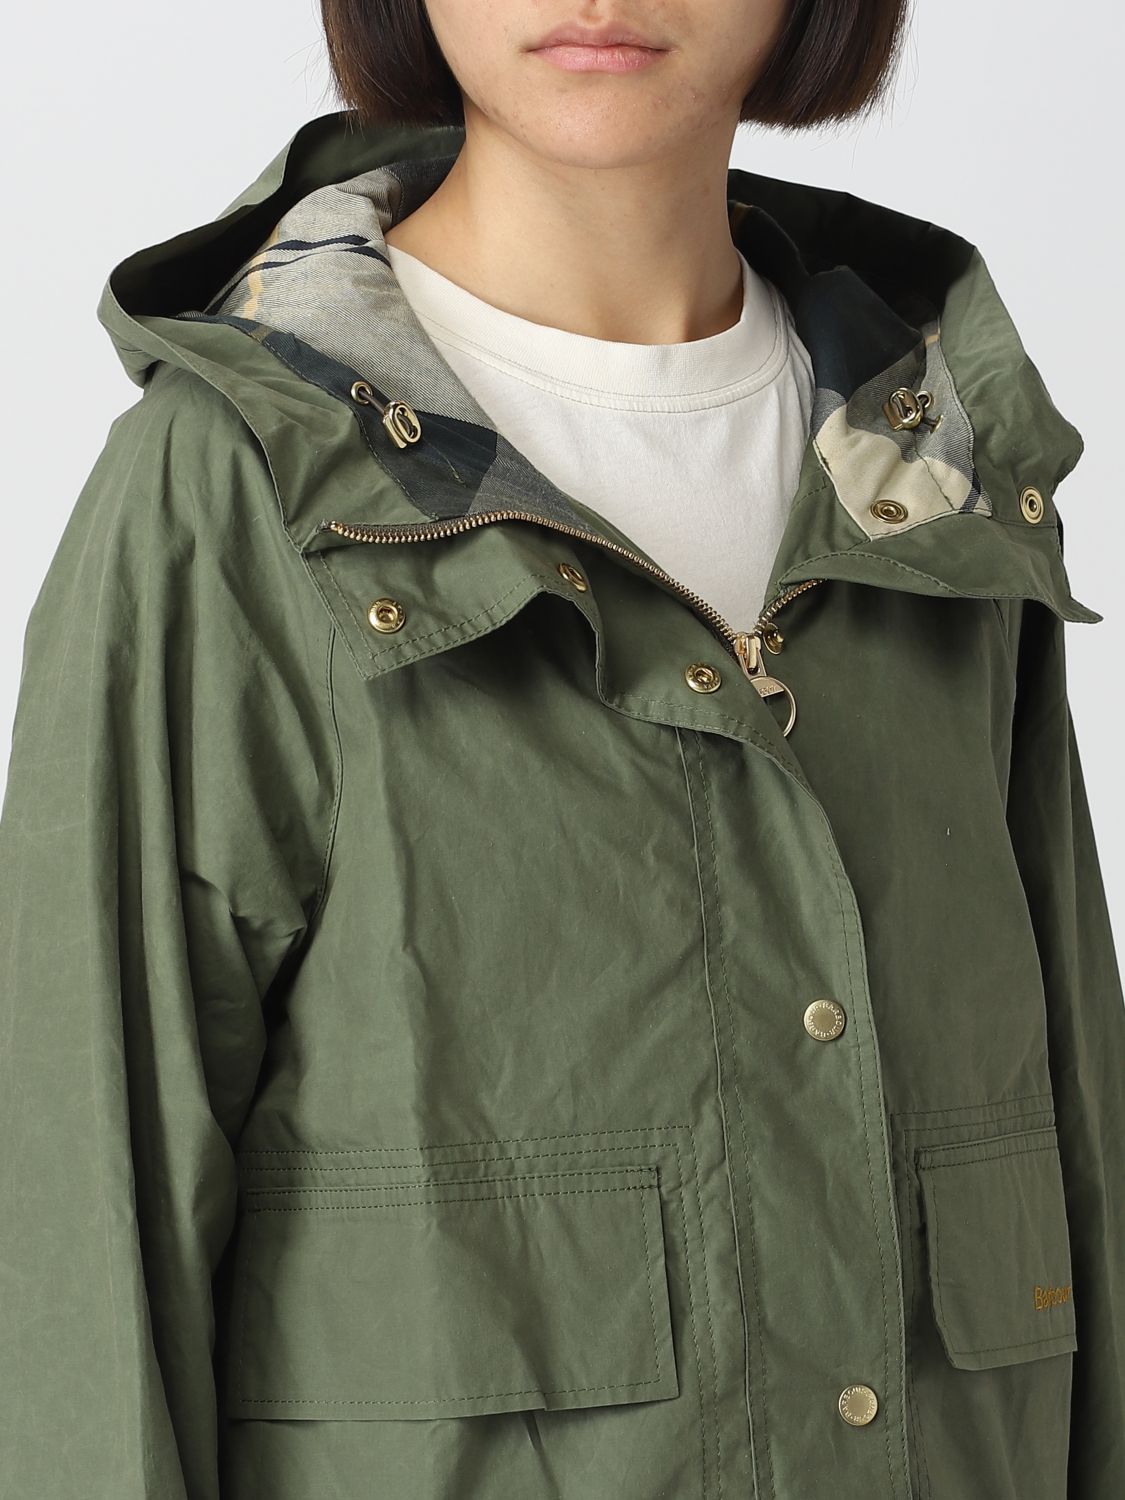 spade Fabriek Aktentas BARBOUR: jacket for woman - Military | Barbour jacket LSP0090 online on  GIGLIO.COM